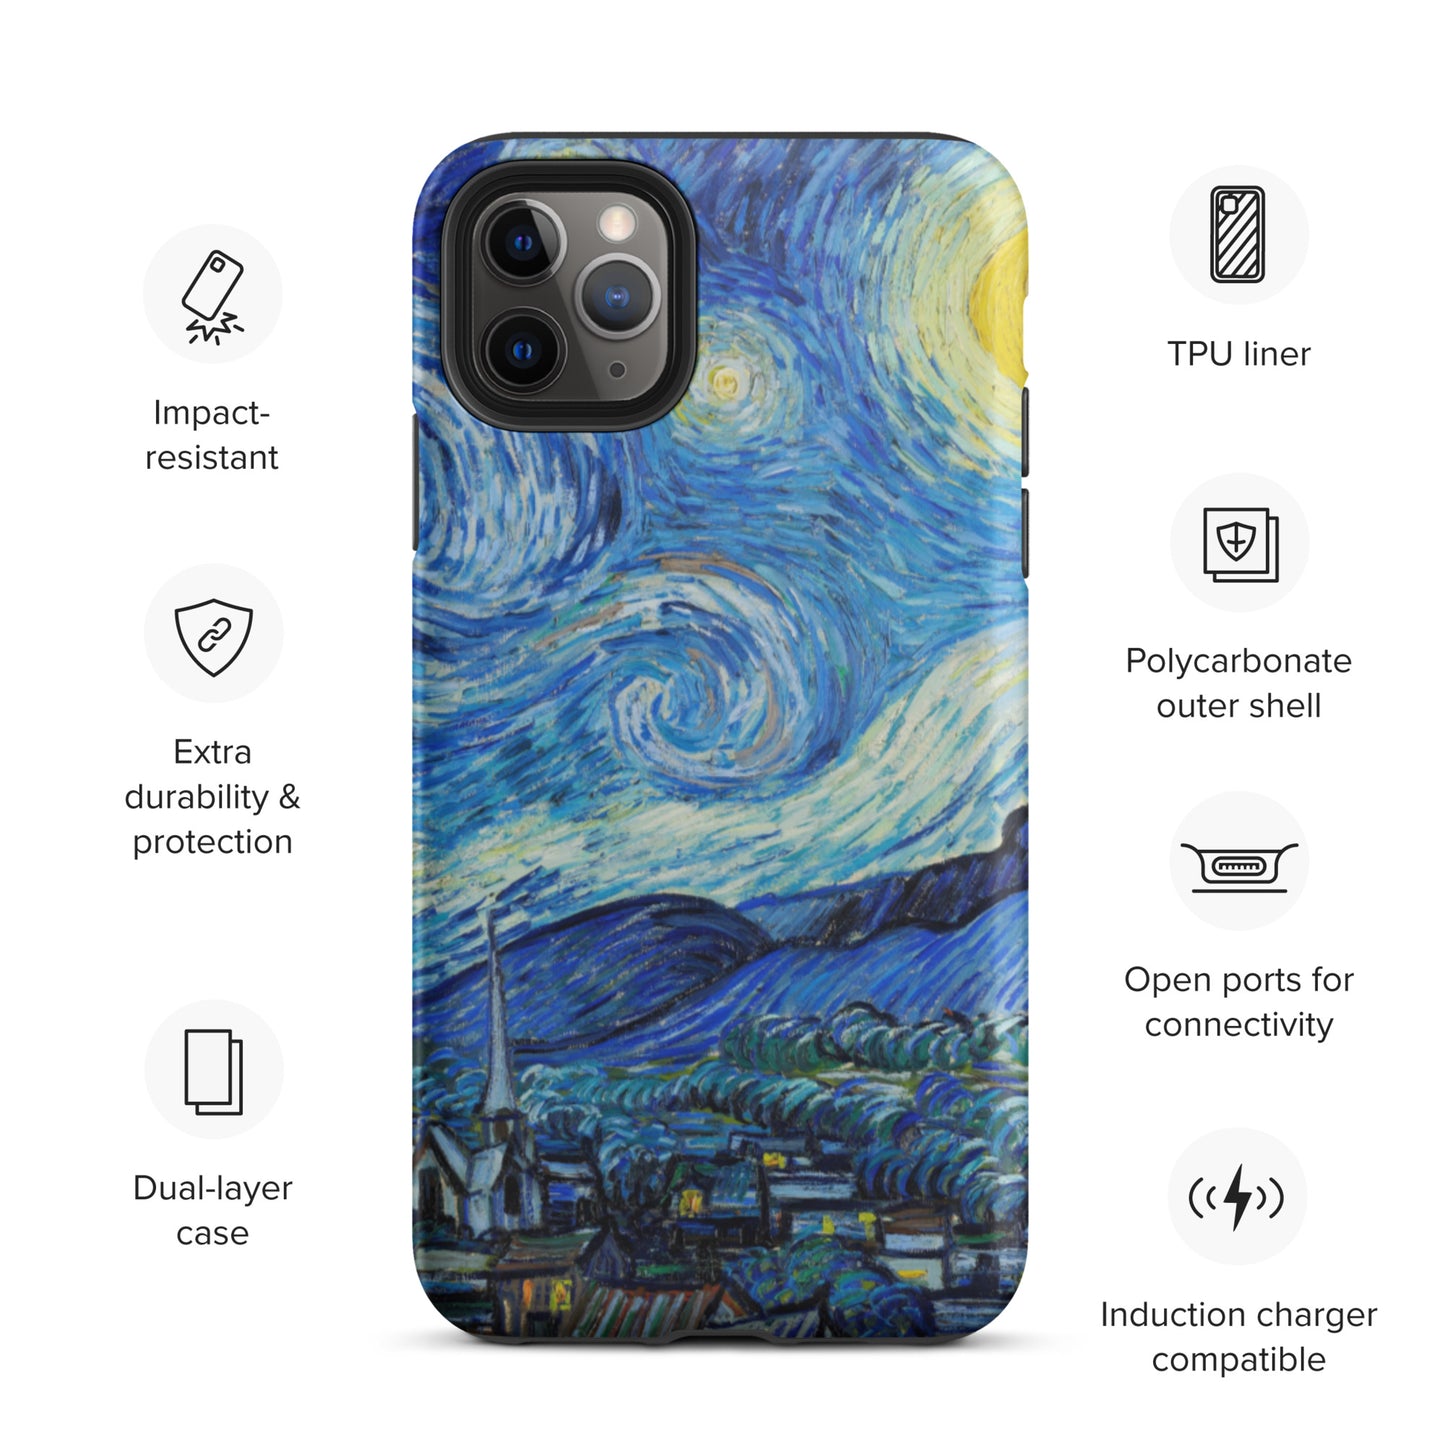 Starry Night - Tough iPhone case